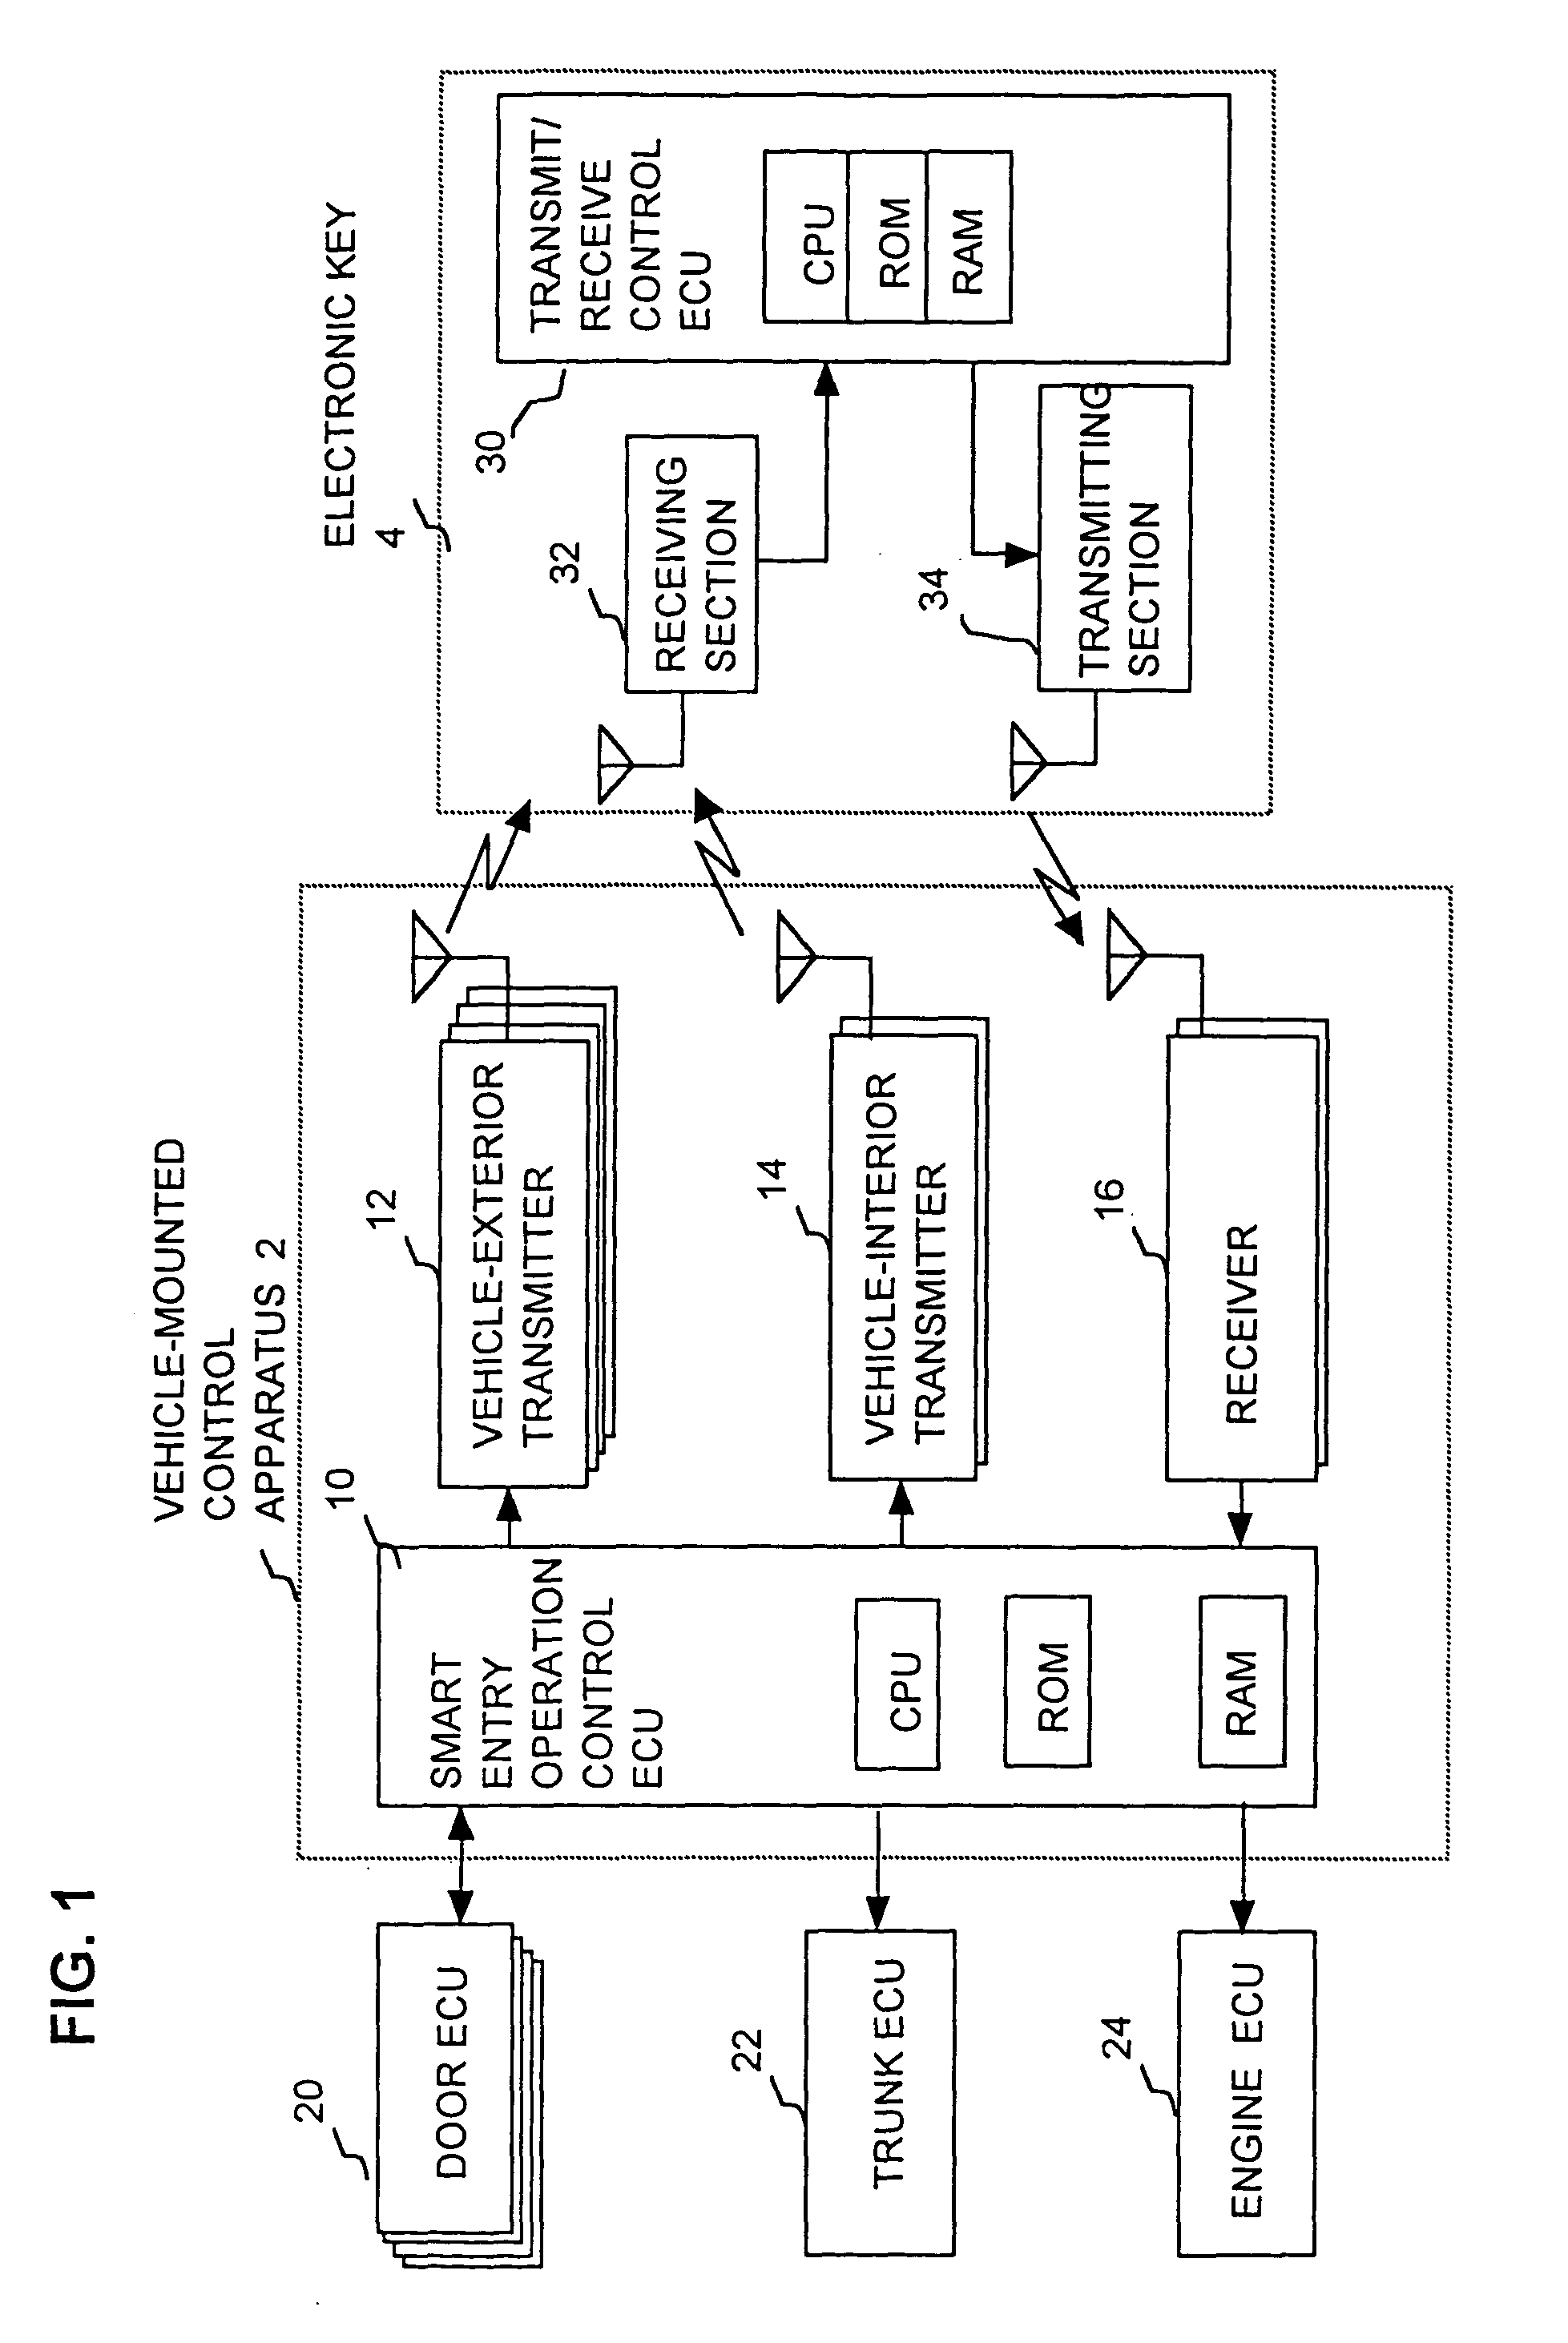 Remote control system for controlling a vehicle with priority of control access being assigned to the most recent user of the vehicle